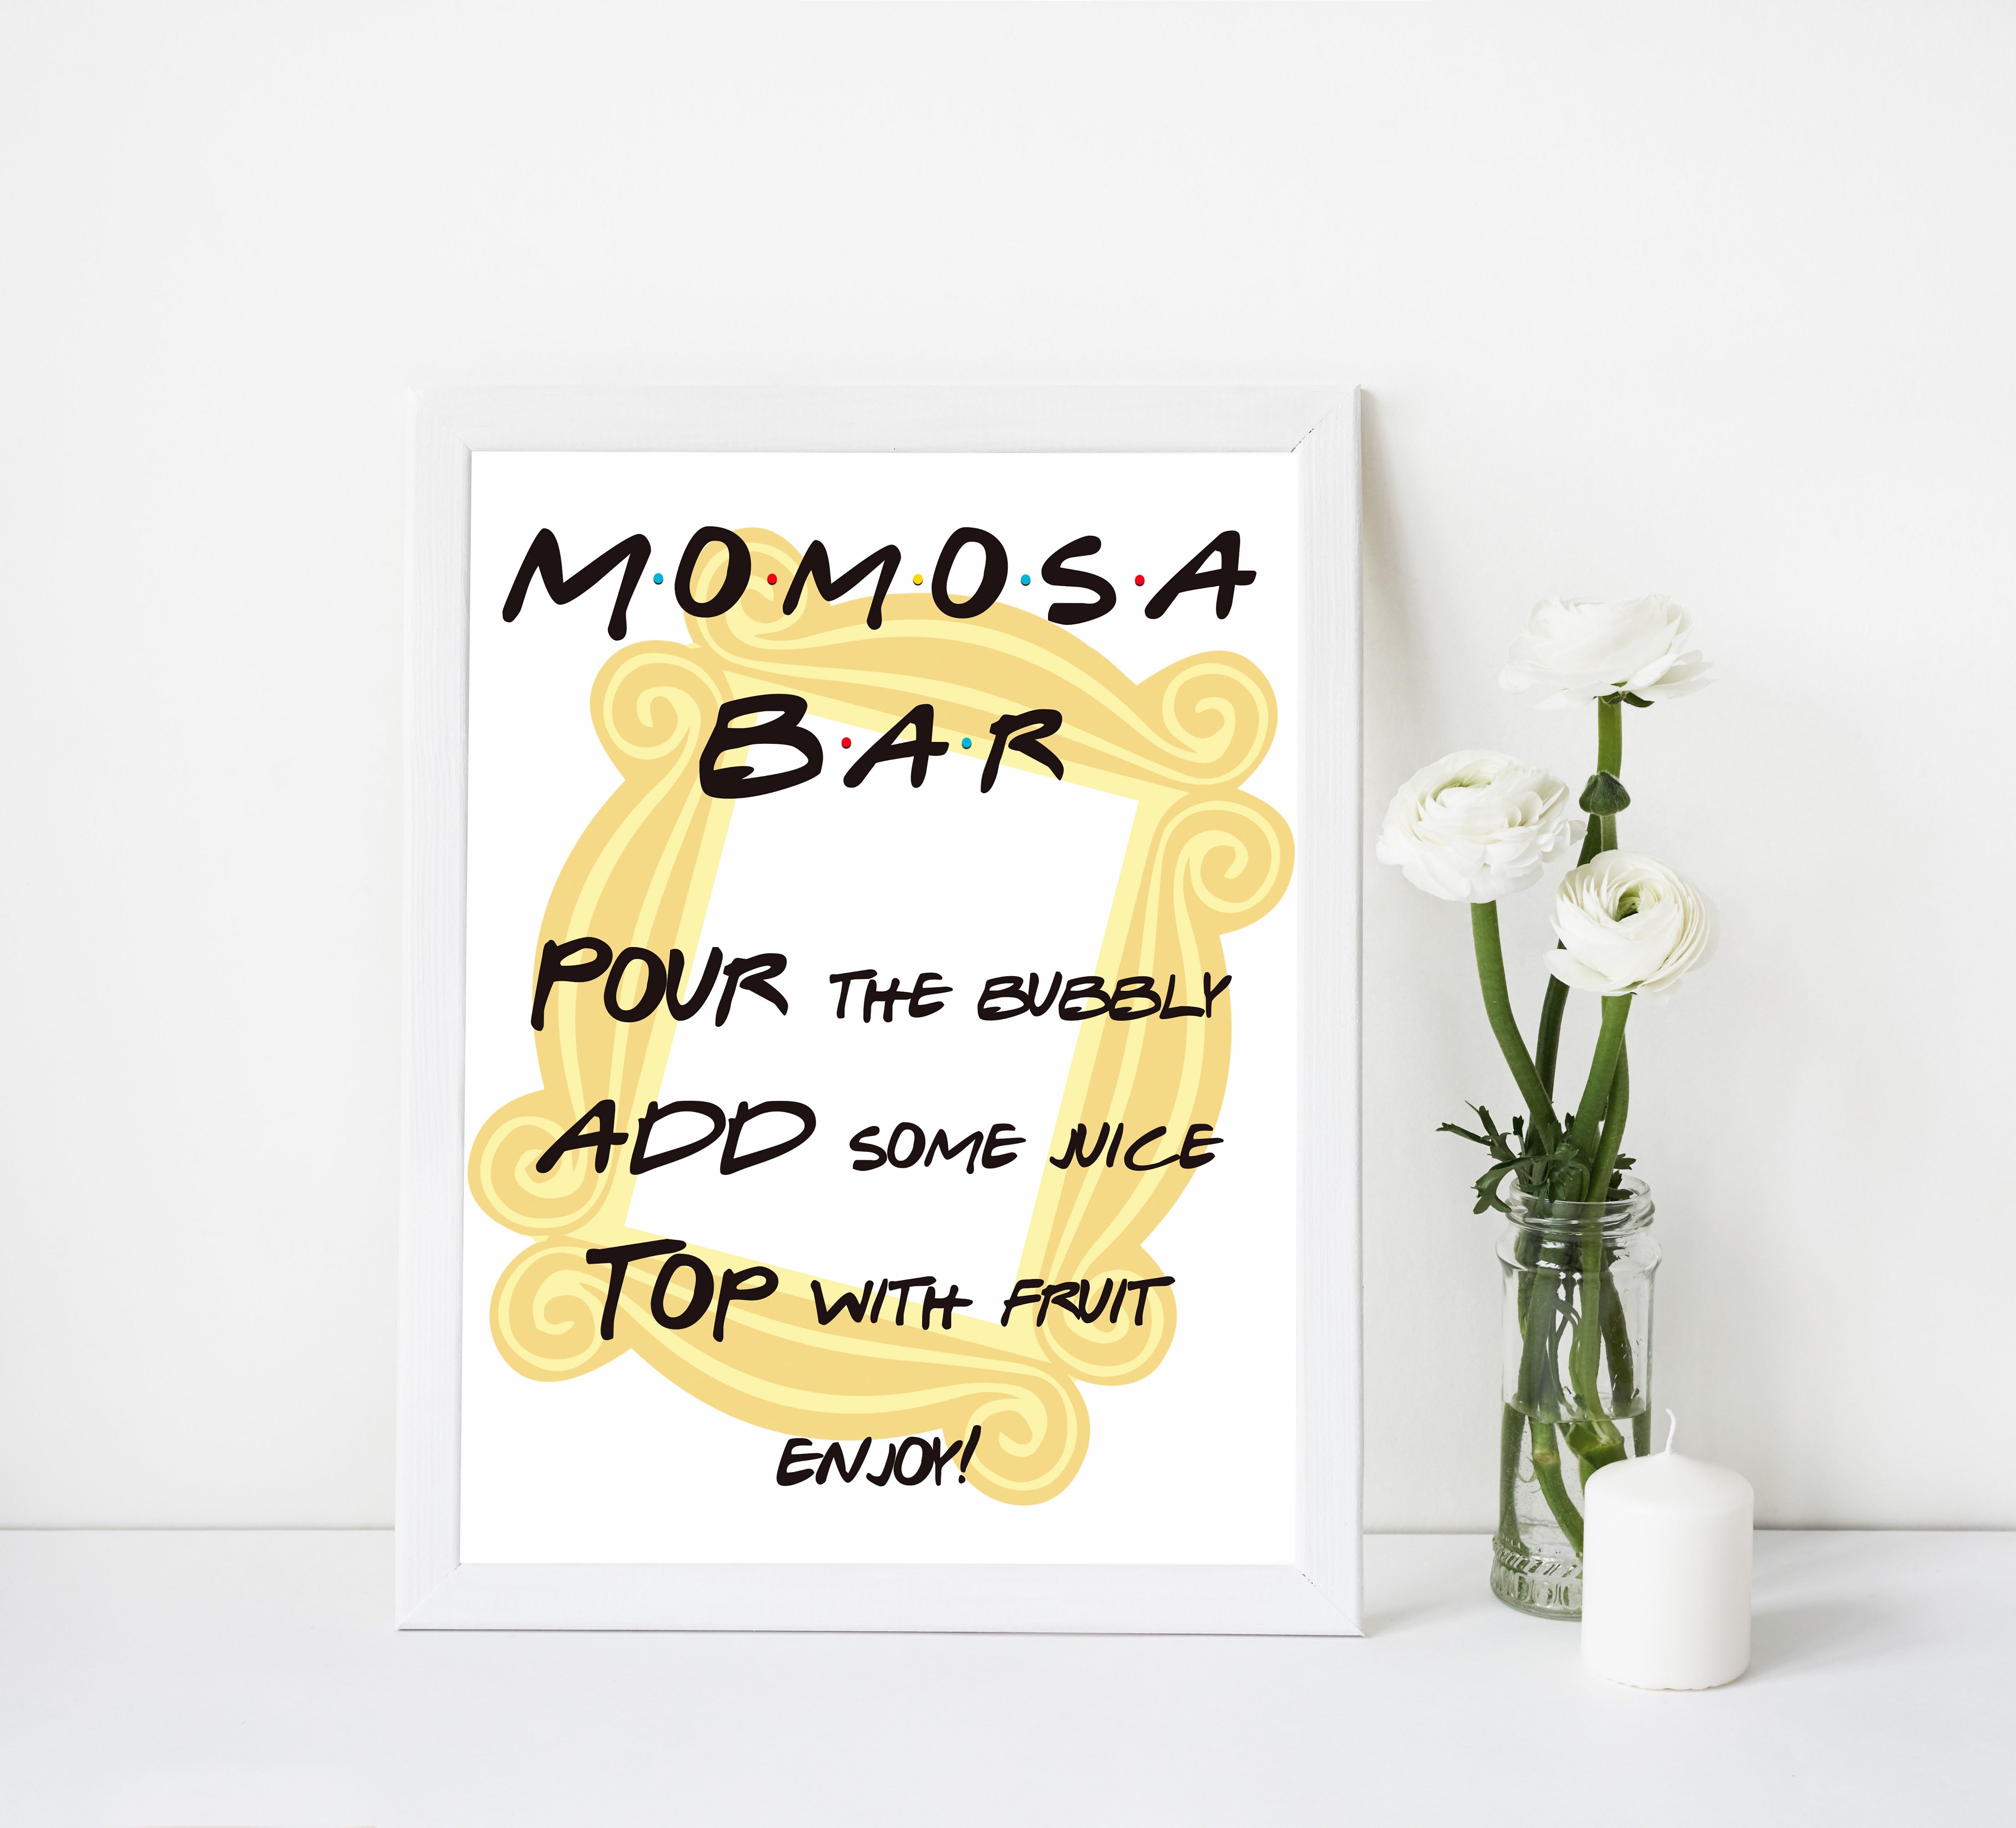 Momosa baby table sign, Friends baby decor, printable baby table signs, printable baby decor, friends table signs, fun baby signs, friends fun baby table signs